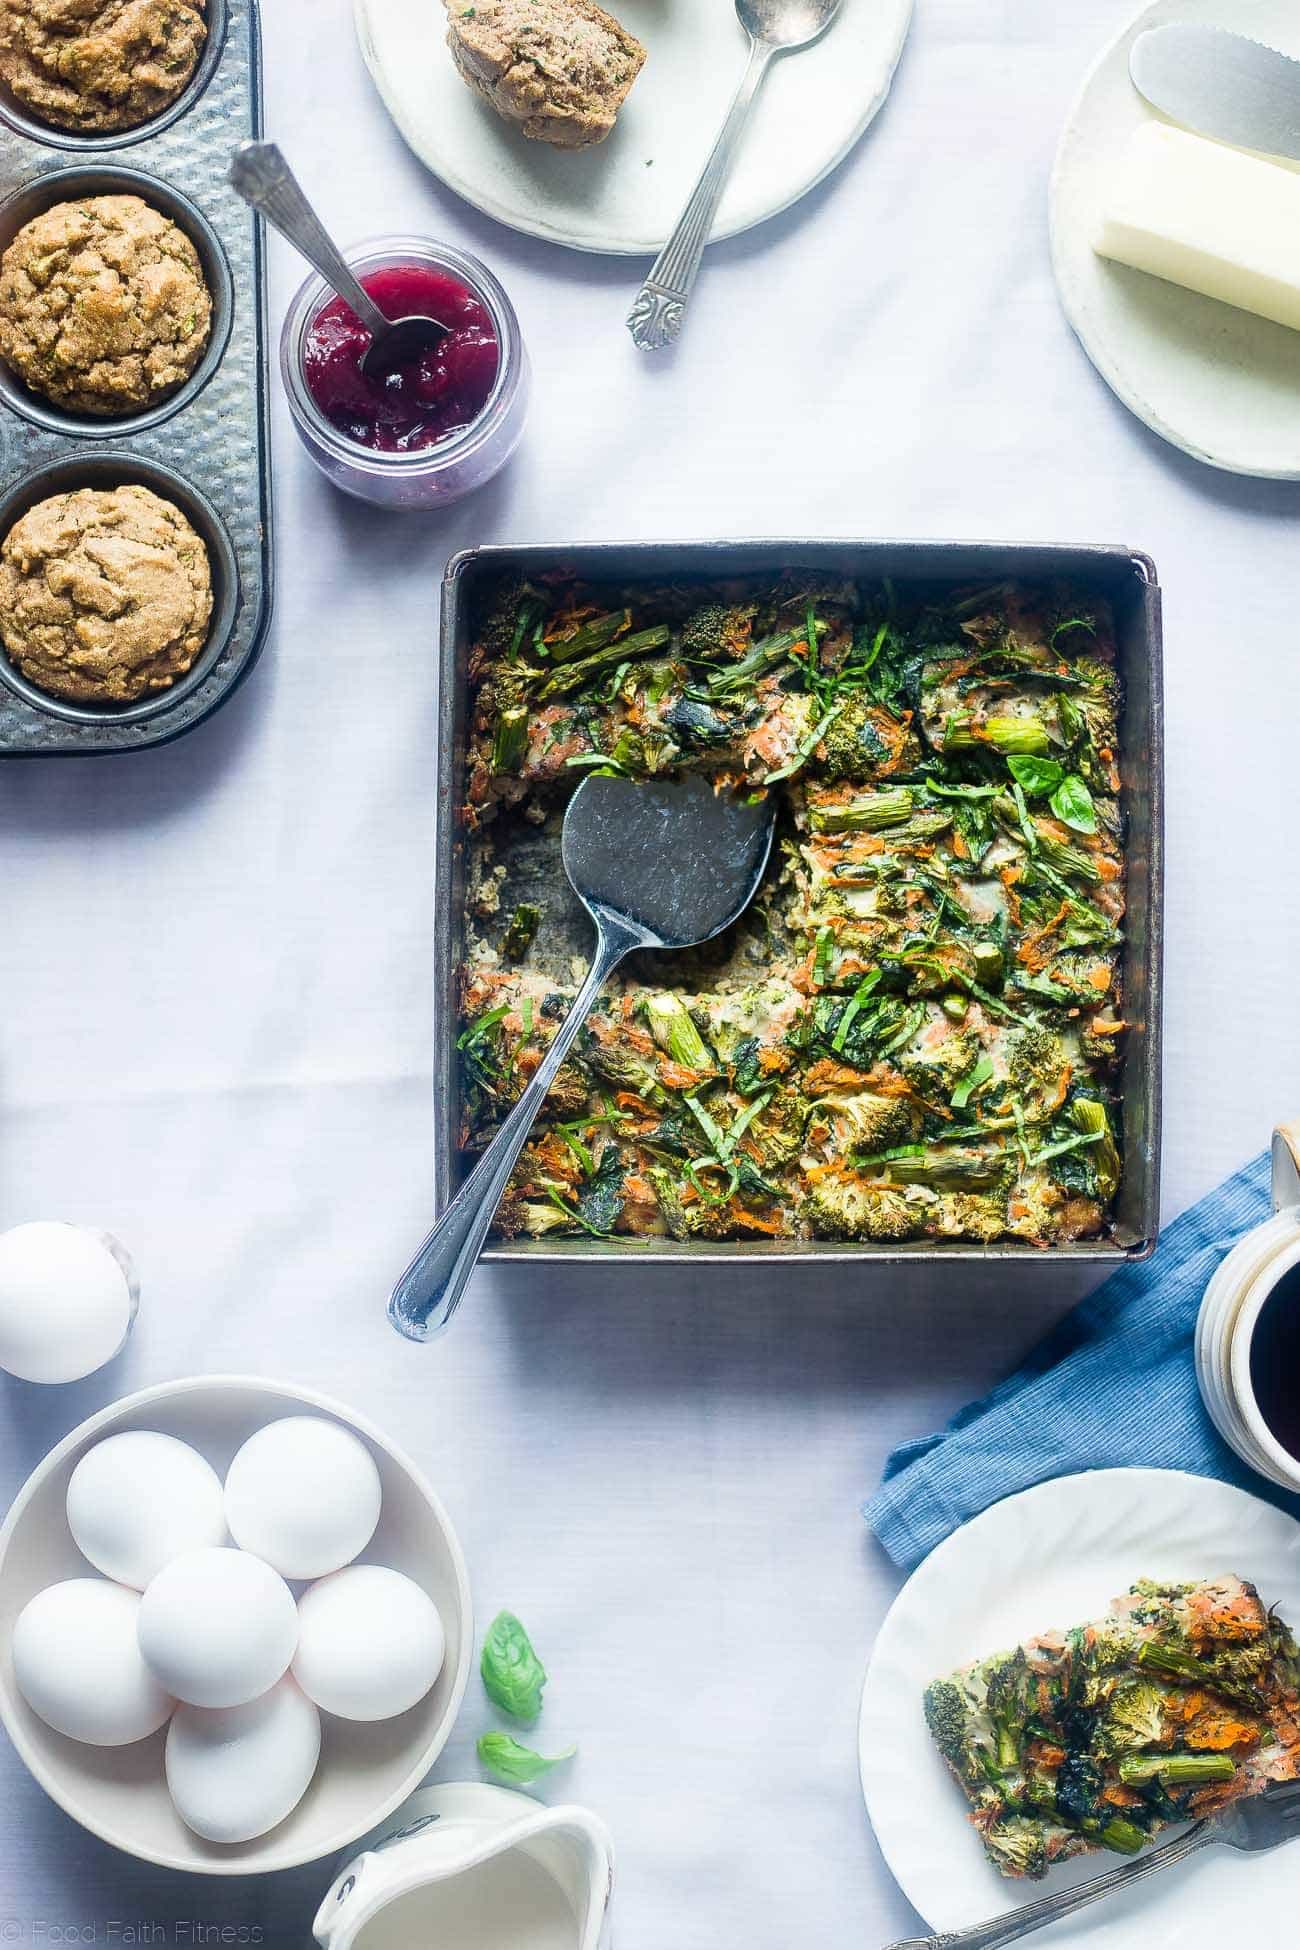 Gluten Free Spring Veggie Sausage Breakfast Casserole - This easy, overnight gluten free breakfast casserole is loaded with seasonal veggies and is only 175 calories! Perfect for spring brunches! | Foodfaithfitness.com | @FoodFaithFit